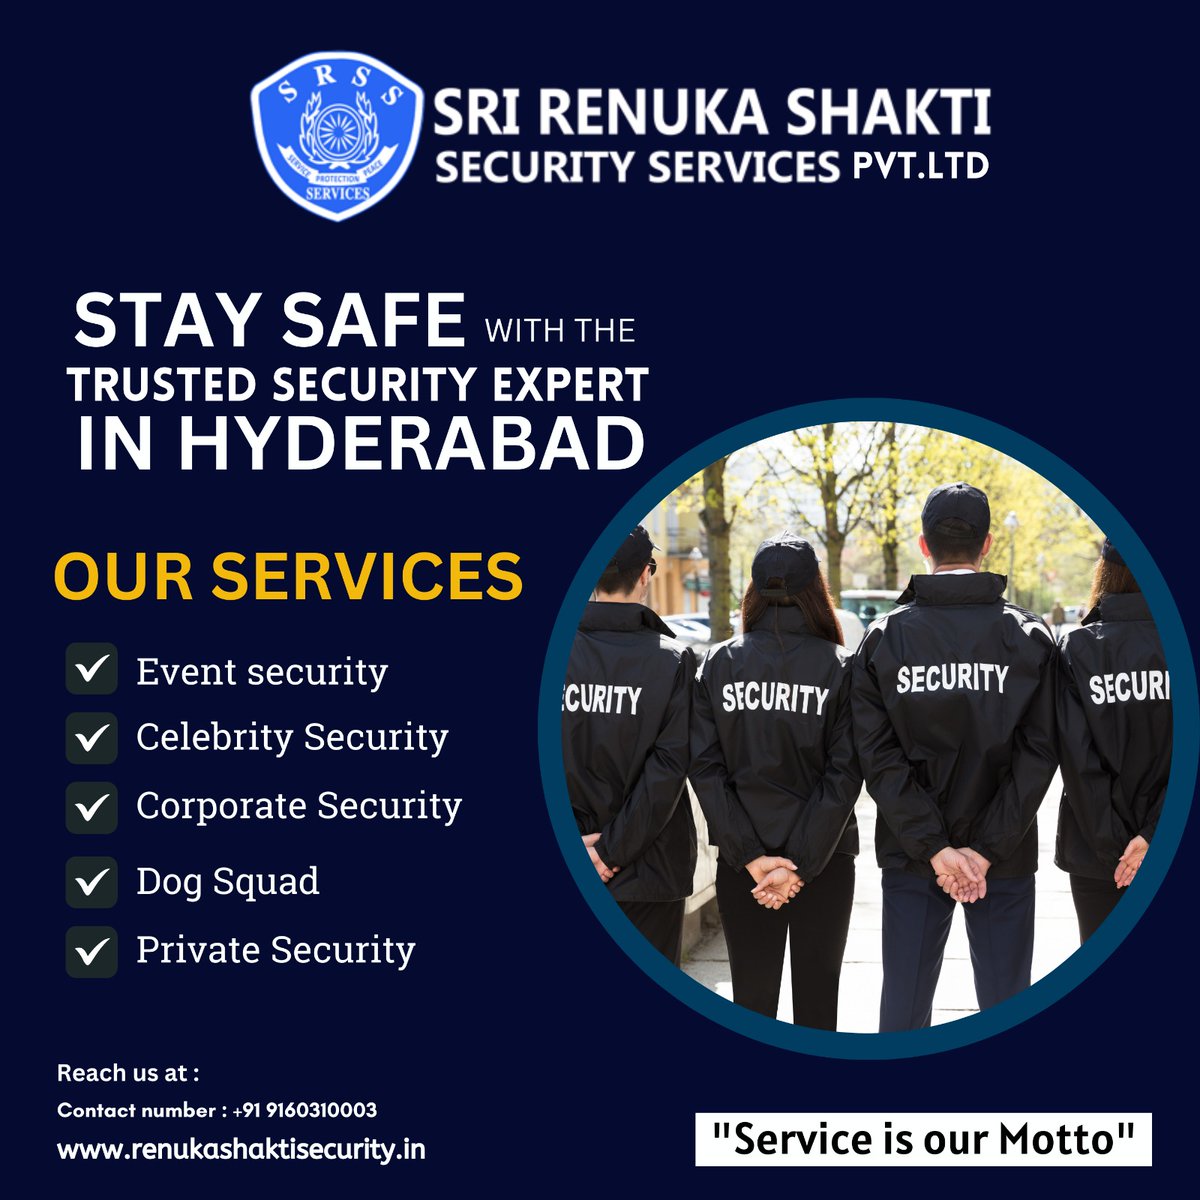 Sri Renuka Shakti Security Services provides comprehensive security solutions tailored to your needs. Your safety is our priority.     
#SriRenukaShaktiSecurity #SecurityServices #ExpertiseInSafety #DedicationToProtection #YourSafetyMatters